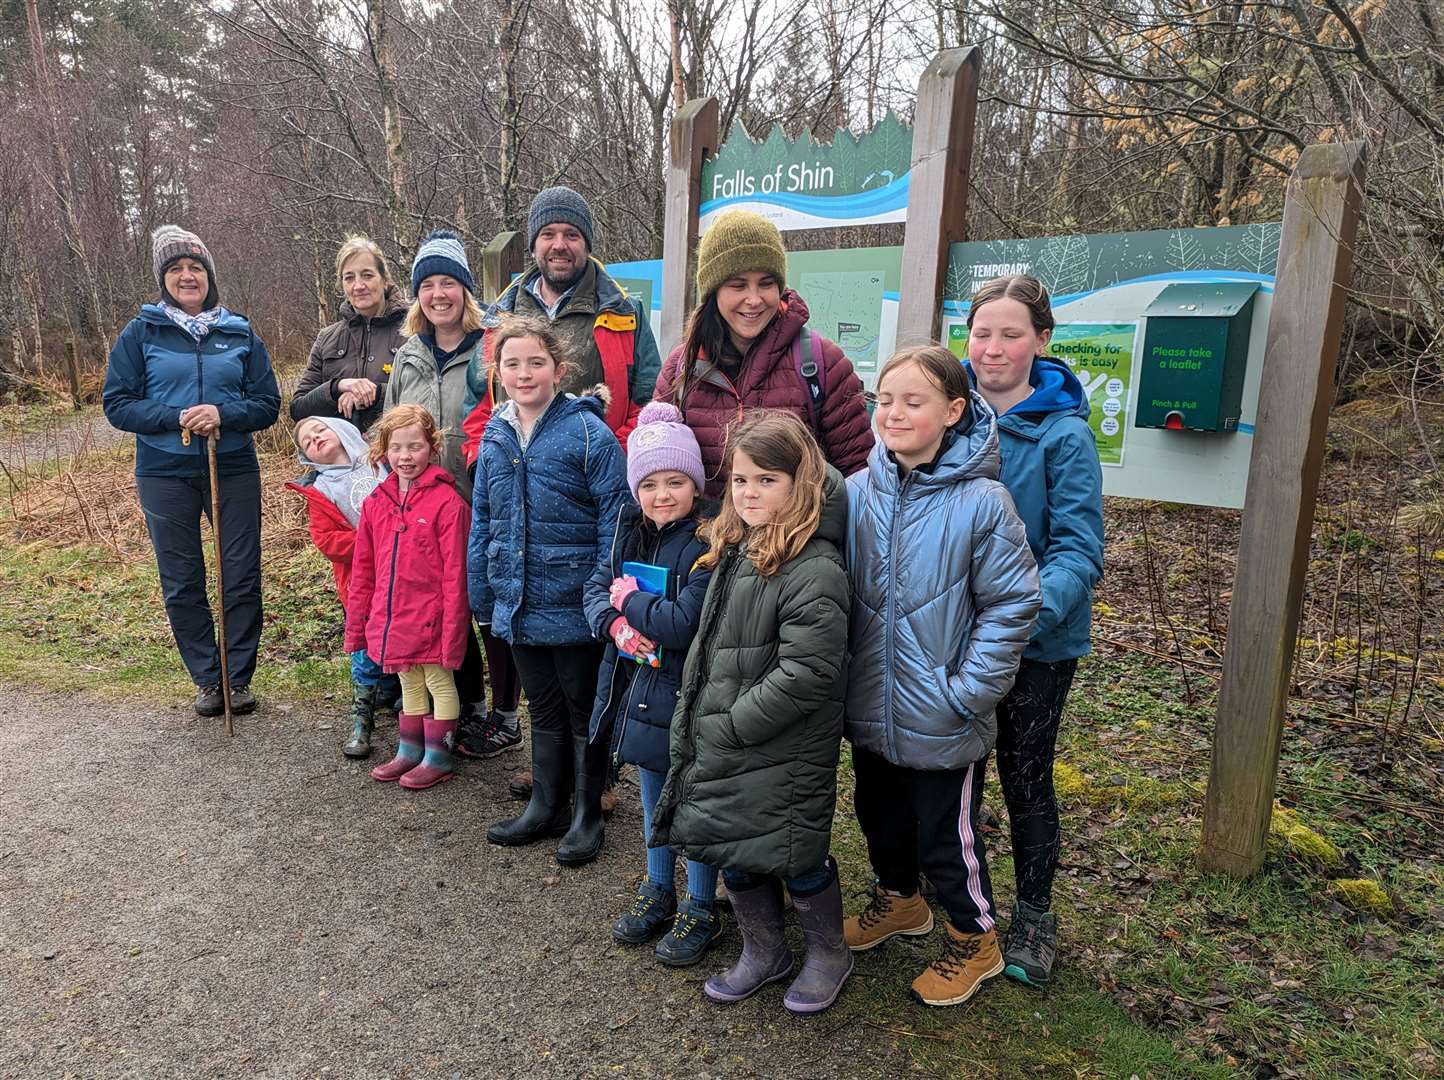 A group of children and adults enjoyed a walk around the pond at Falls of Shin.